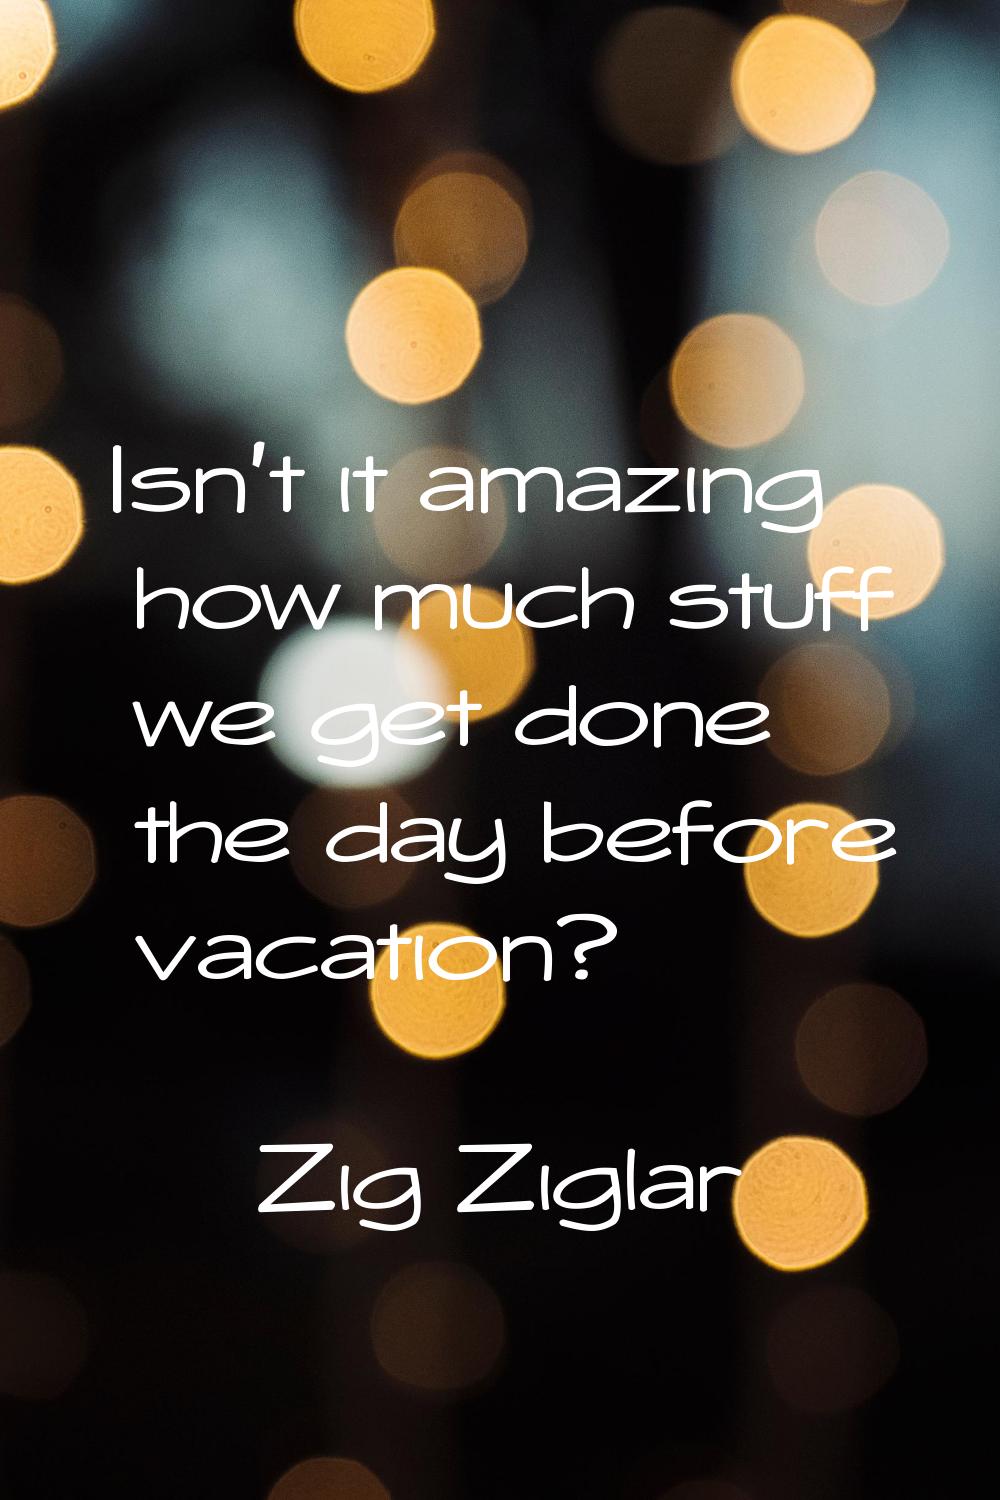 Isn't it amazing how much stuff we get done the day before vacation?